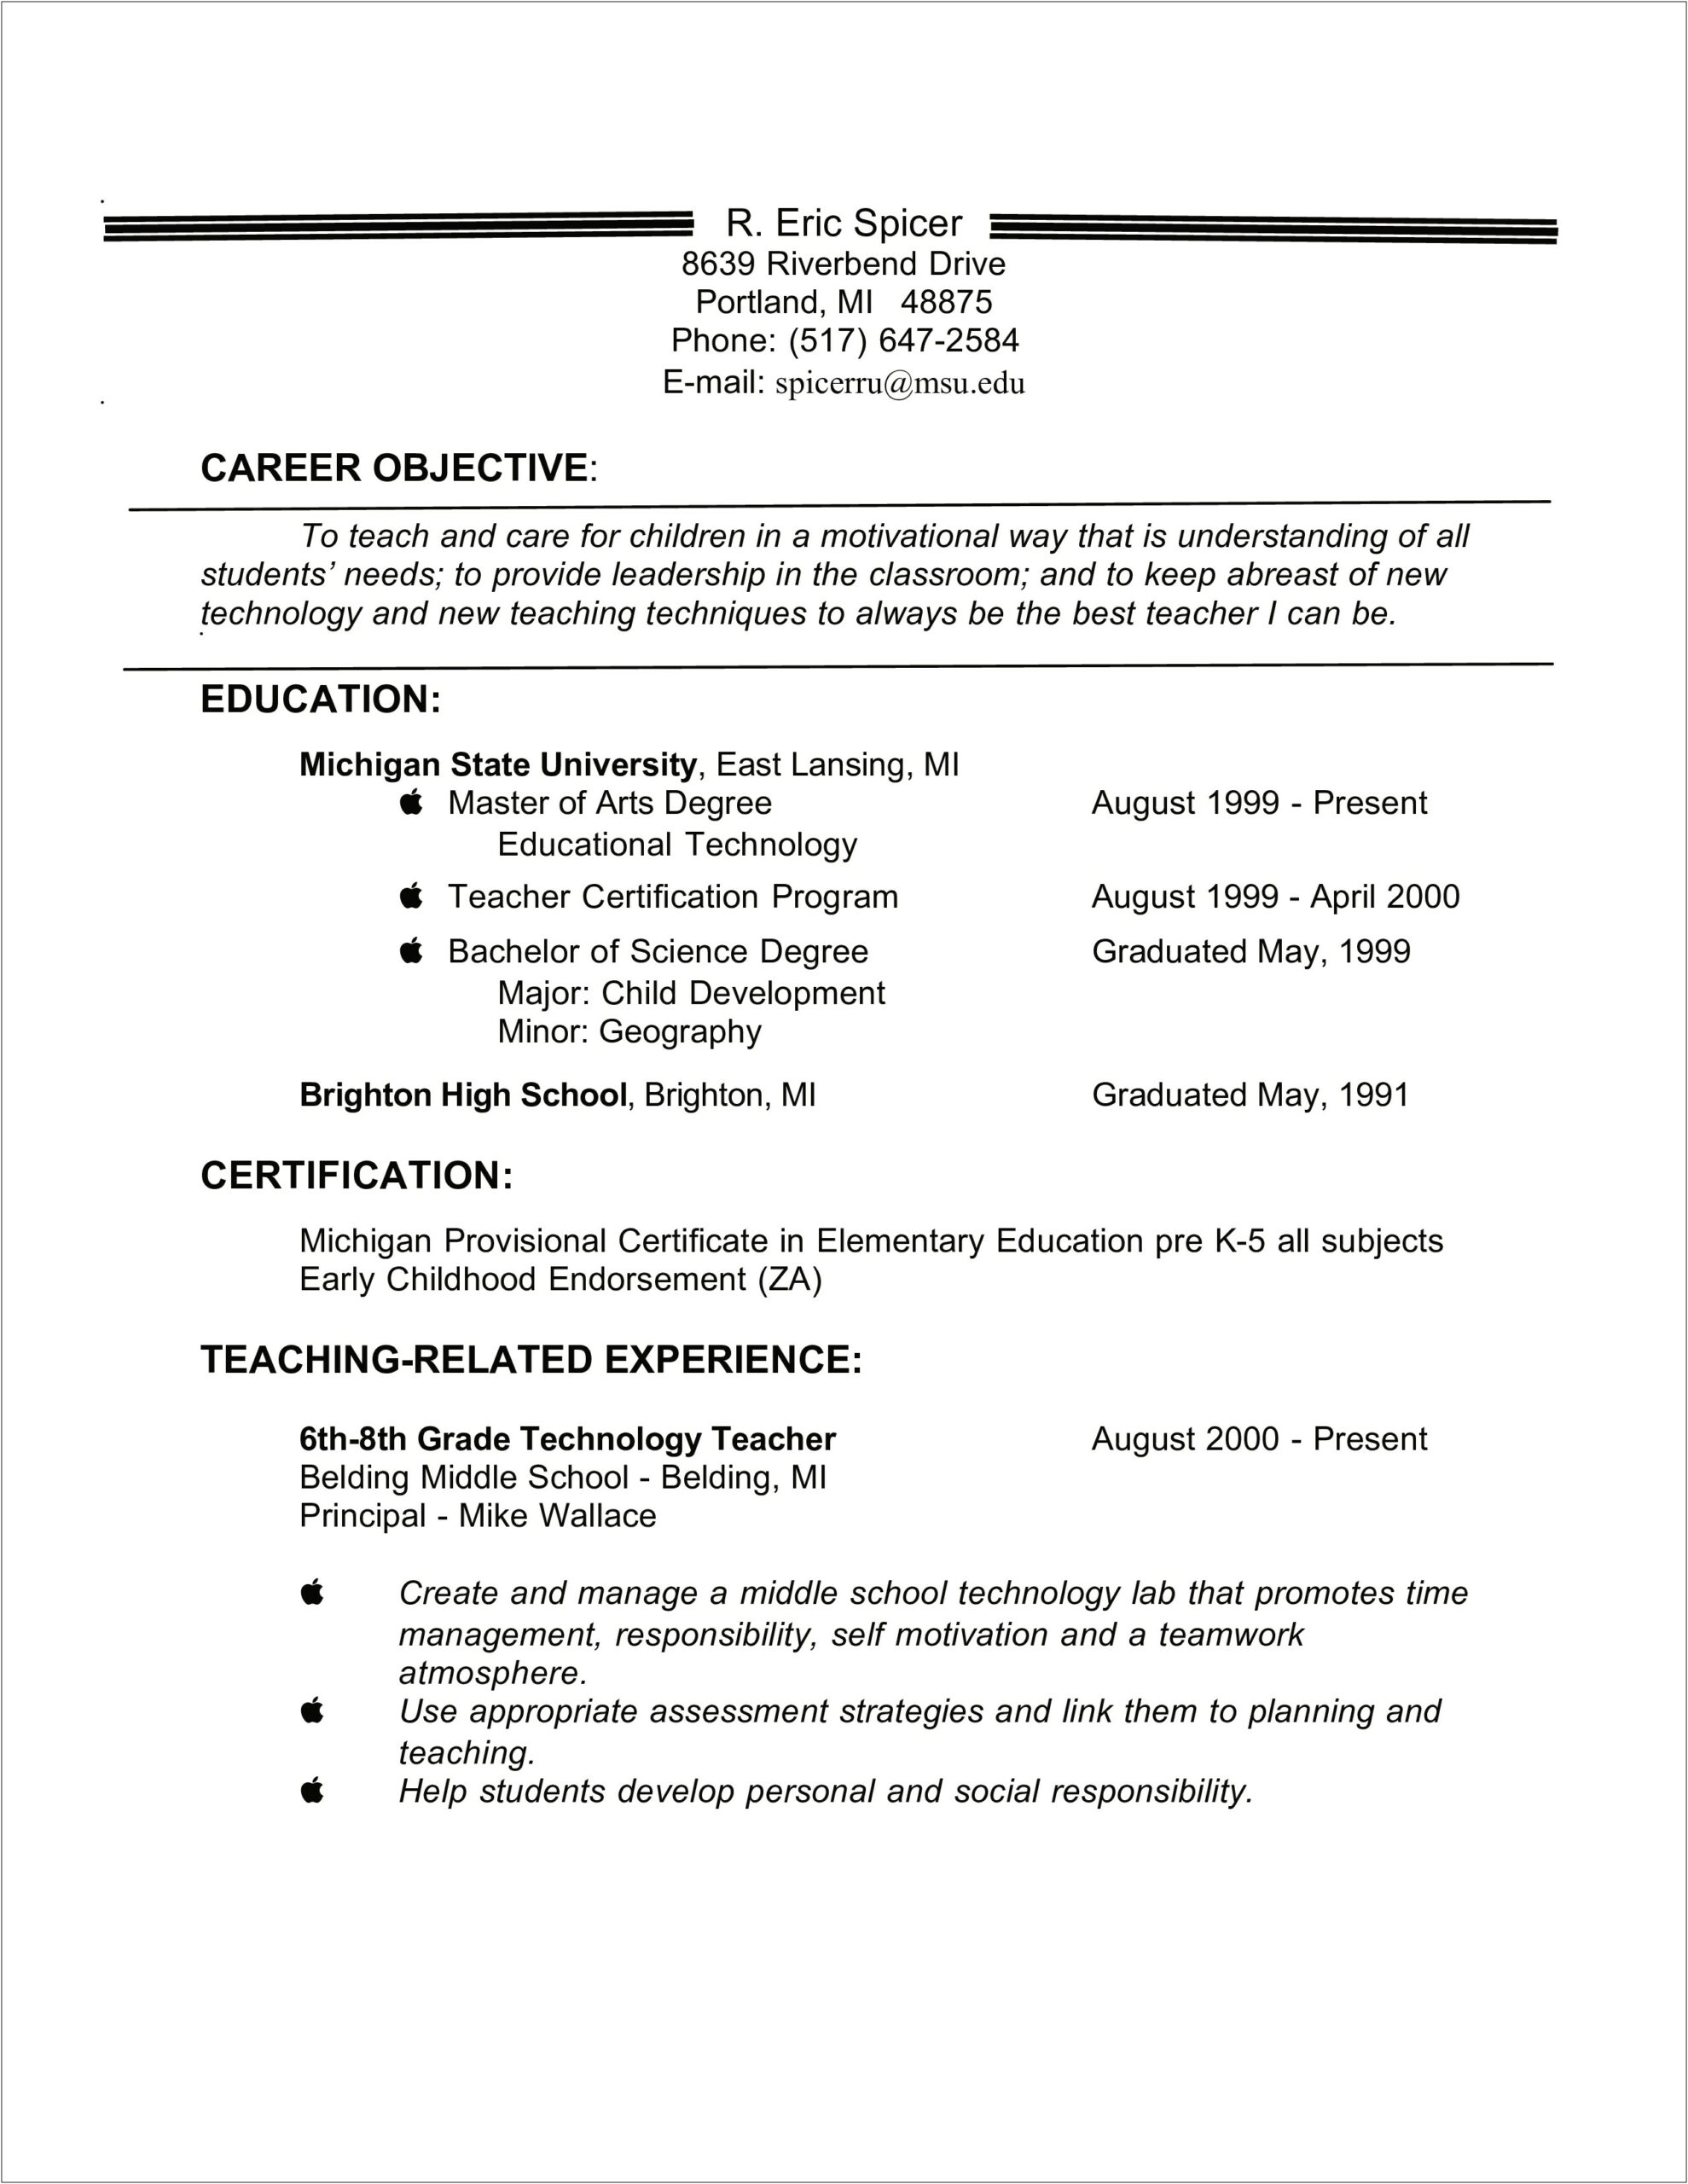 Resume Objective For Applying To Graduate School